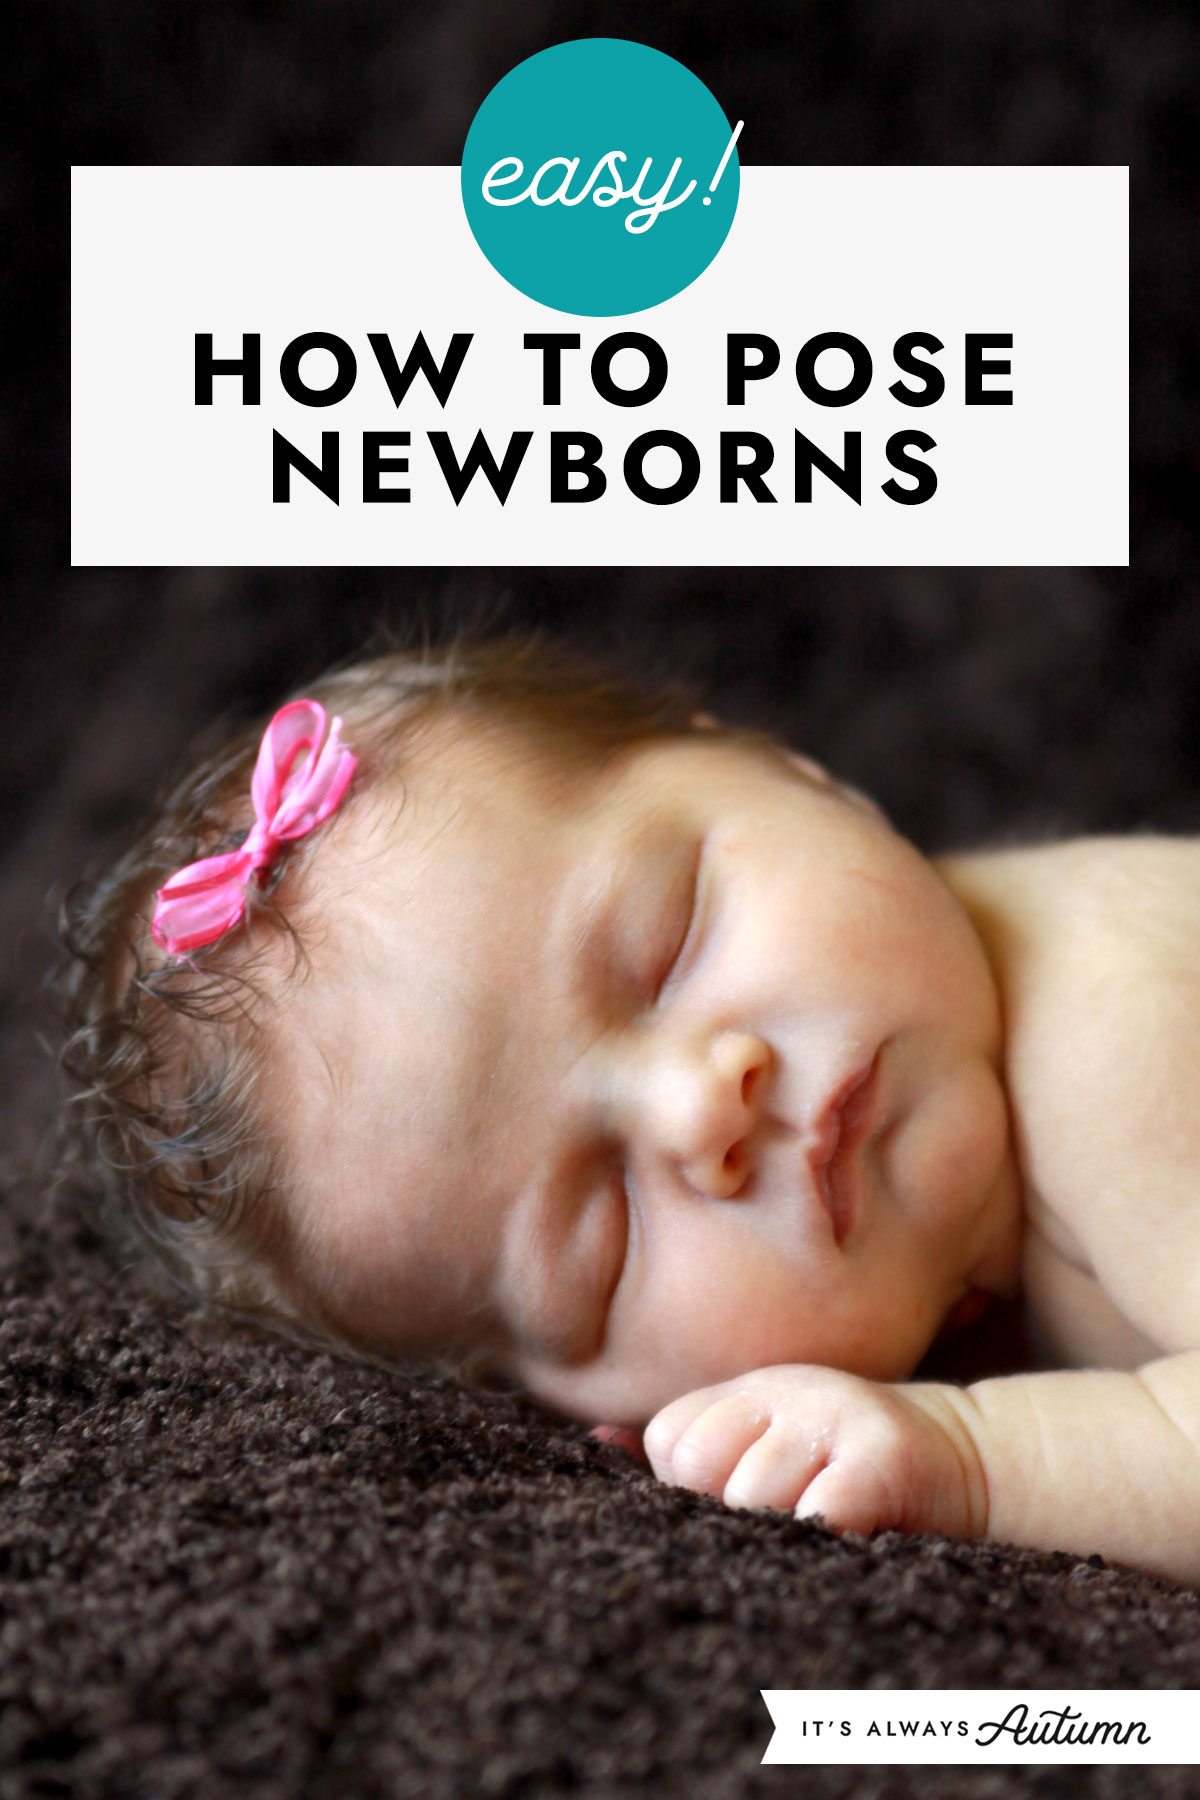 HOW MANY different PICTURES can you take of a NEWBORN baby in ONE POSE -  choosing different ANGLES - YouTube